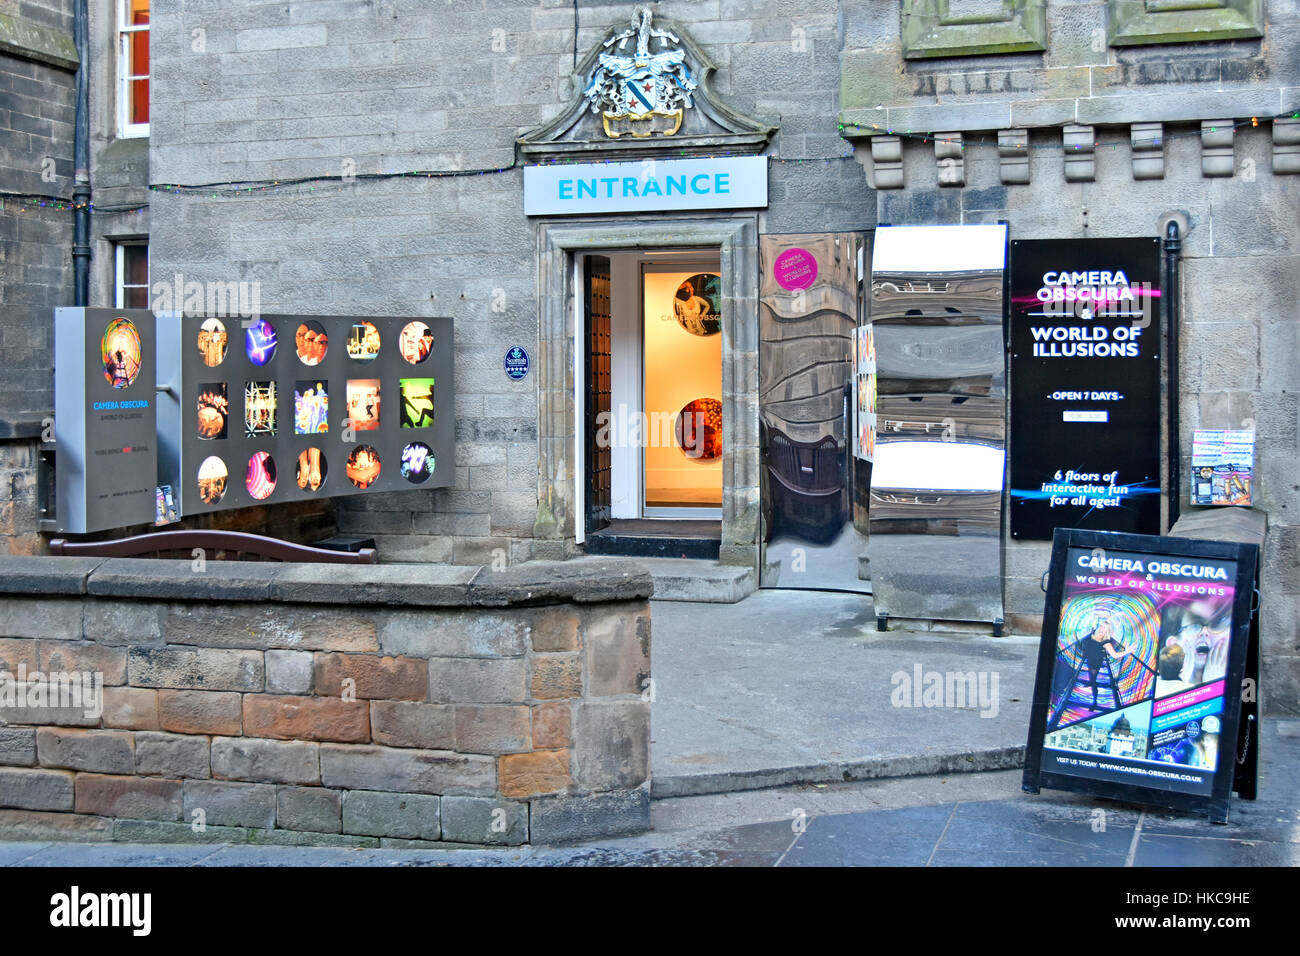 Entrance to Camera Obscura Scotland uk Scottish tourist attraction Edinburgh Old Town on the Castlehill section of the Royal Mile tourism route Stock Photo